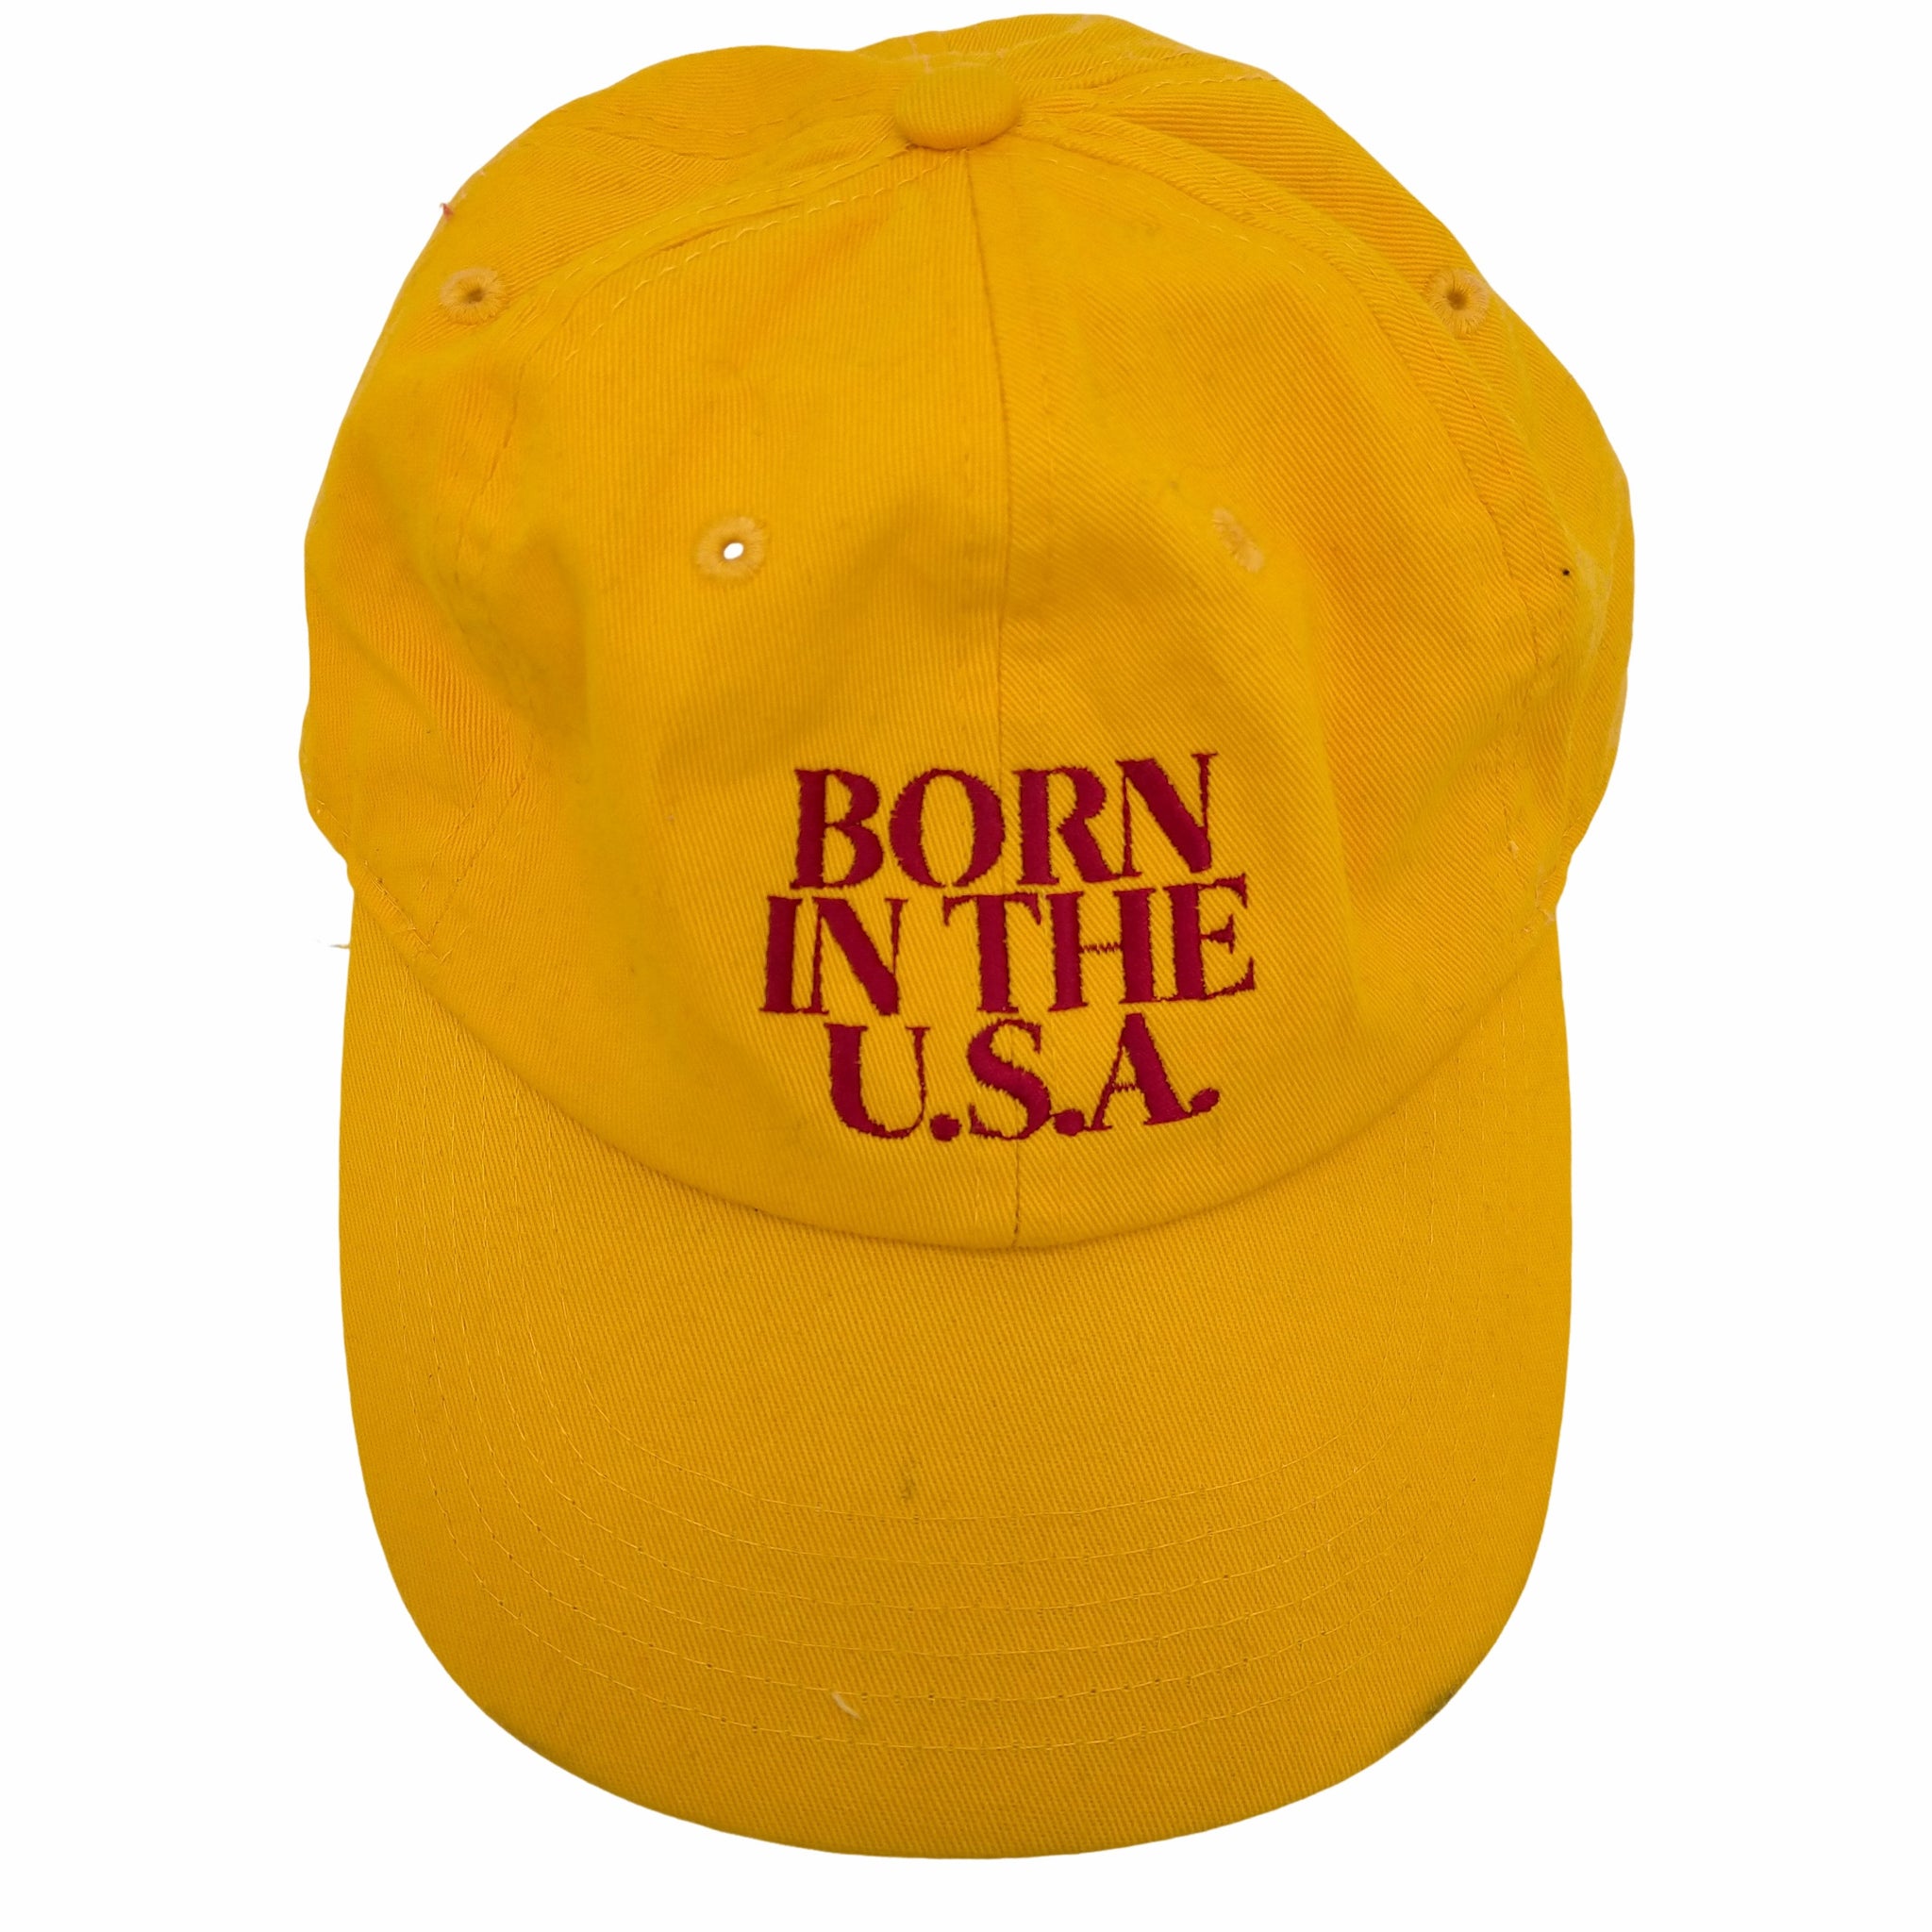 USED古着(ユーズドフルギ)BORN IN THE USA キャップ